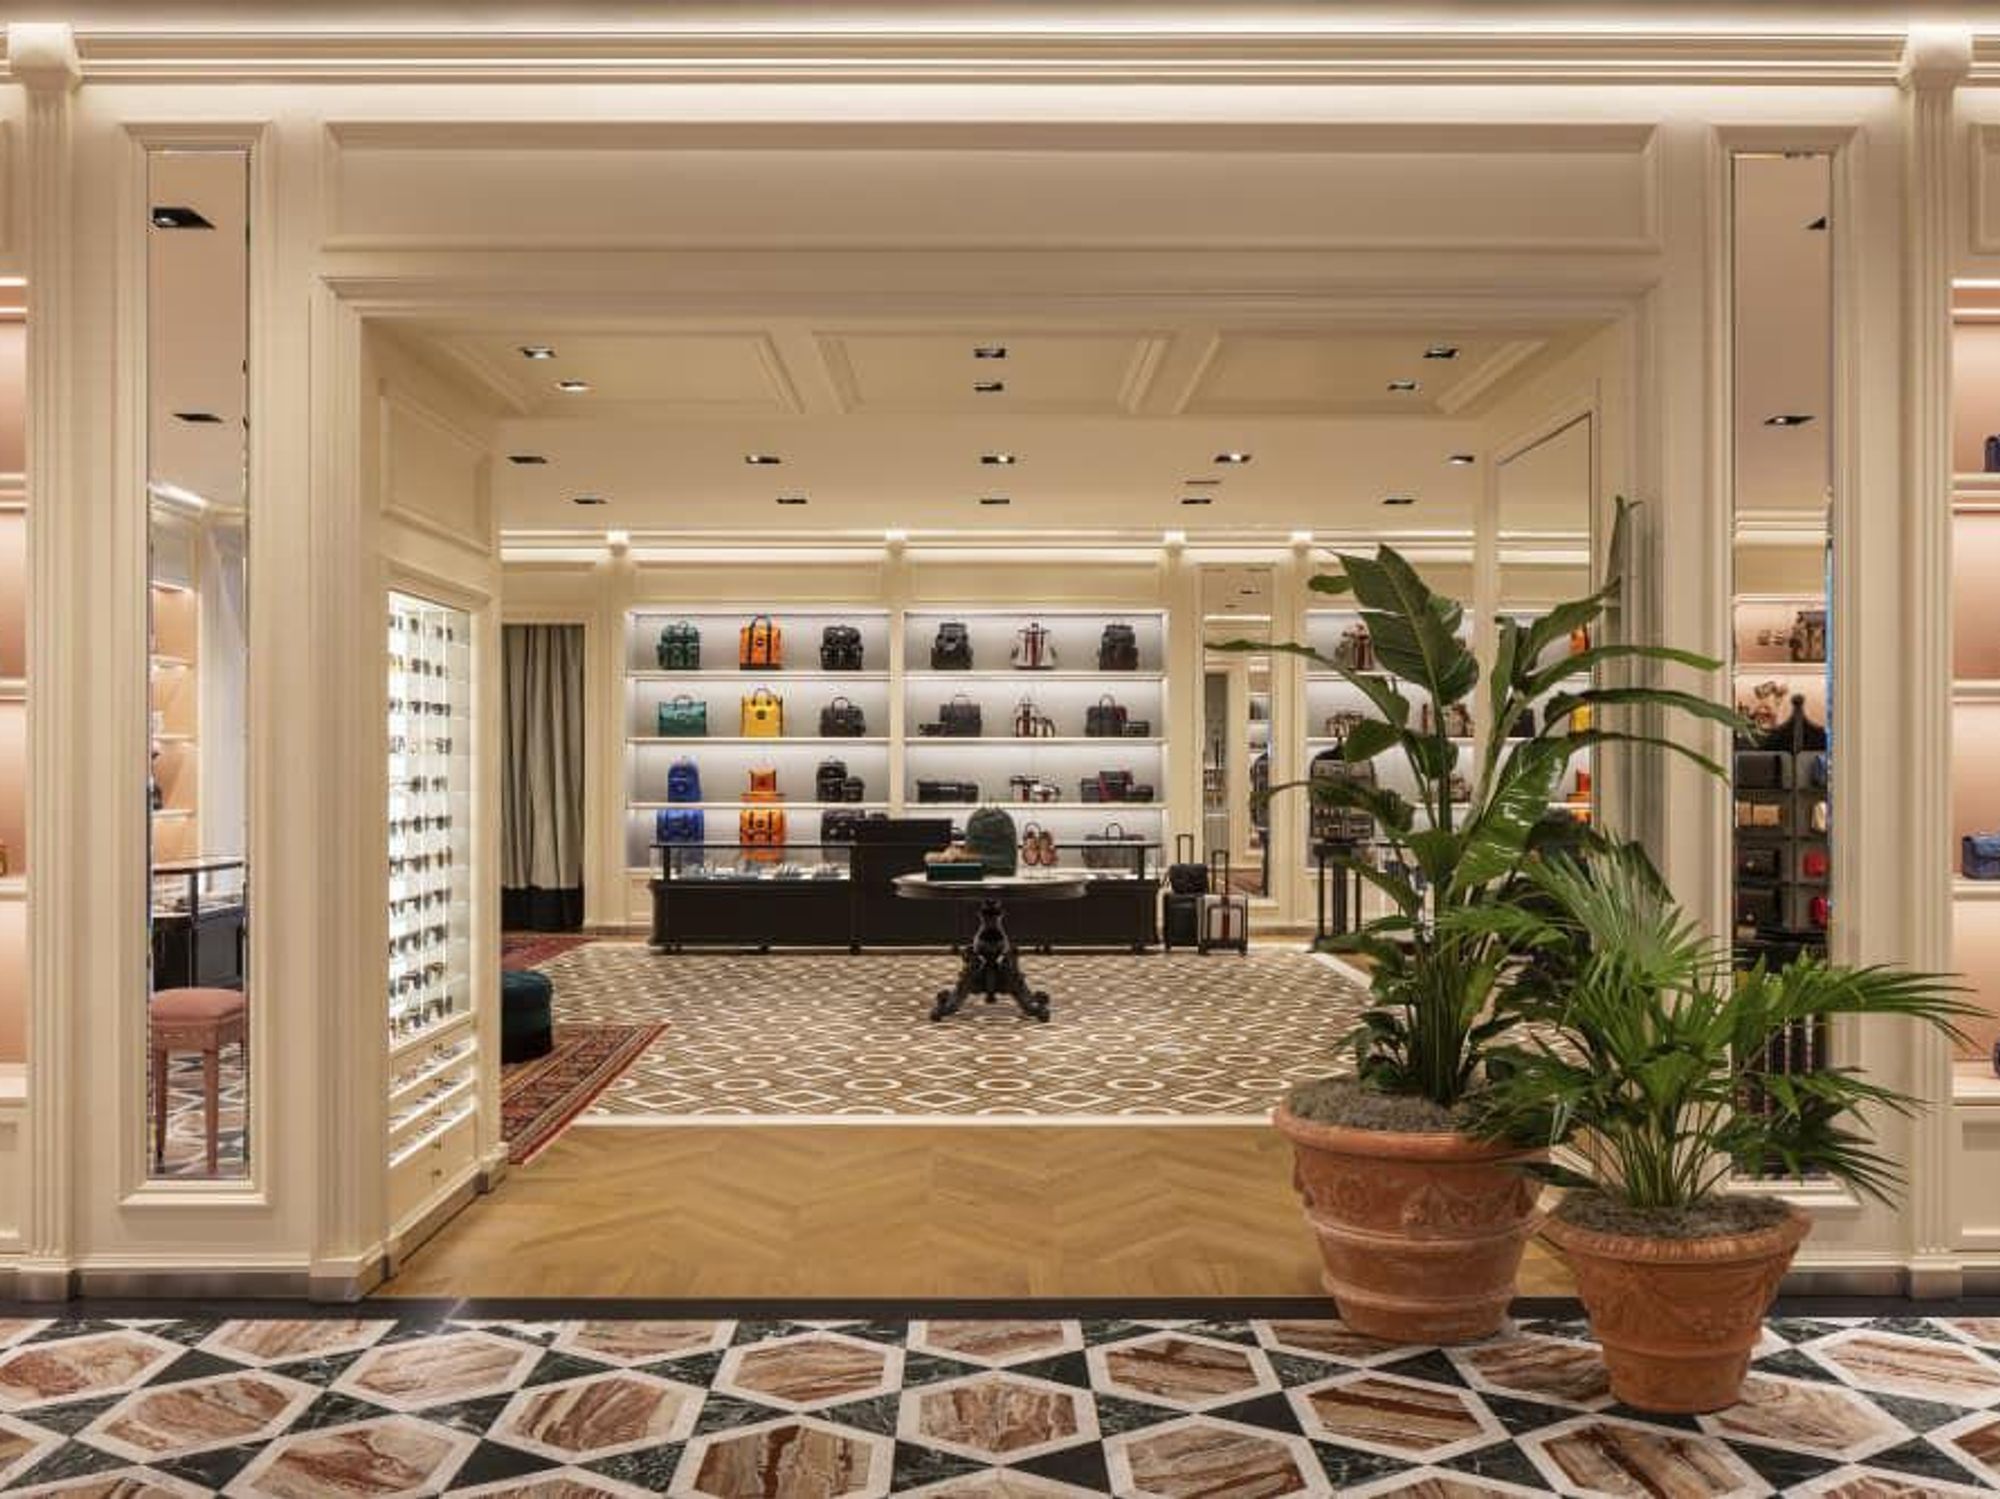 The Gucci boutique is now open at The Domain.